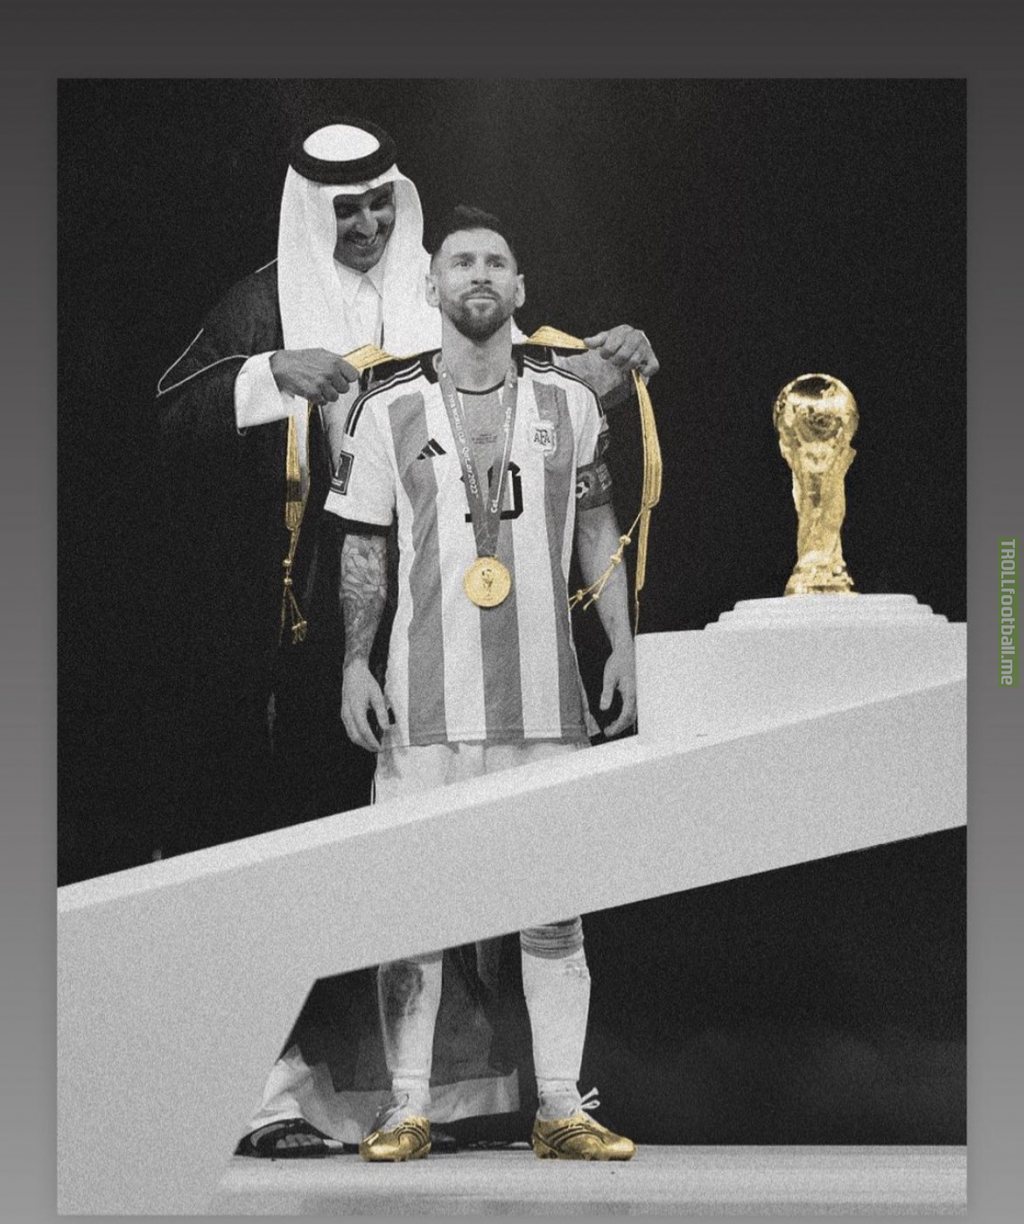 Messi was presented with a Bisht by the Emir of Qatar, a robe worn to symbolize prestige on special occasions